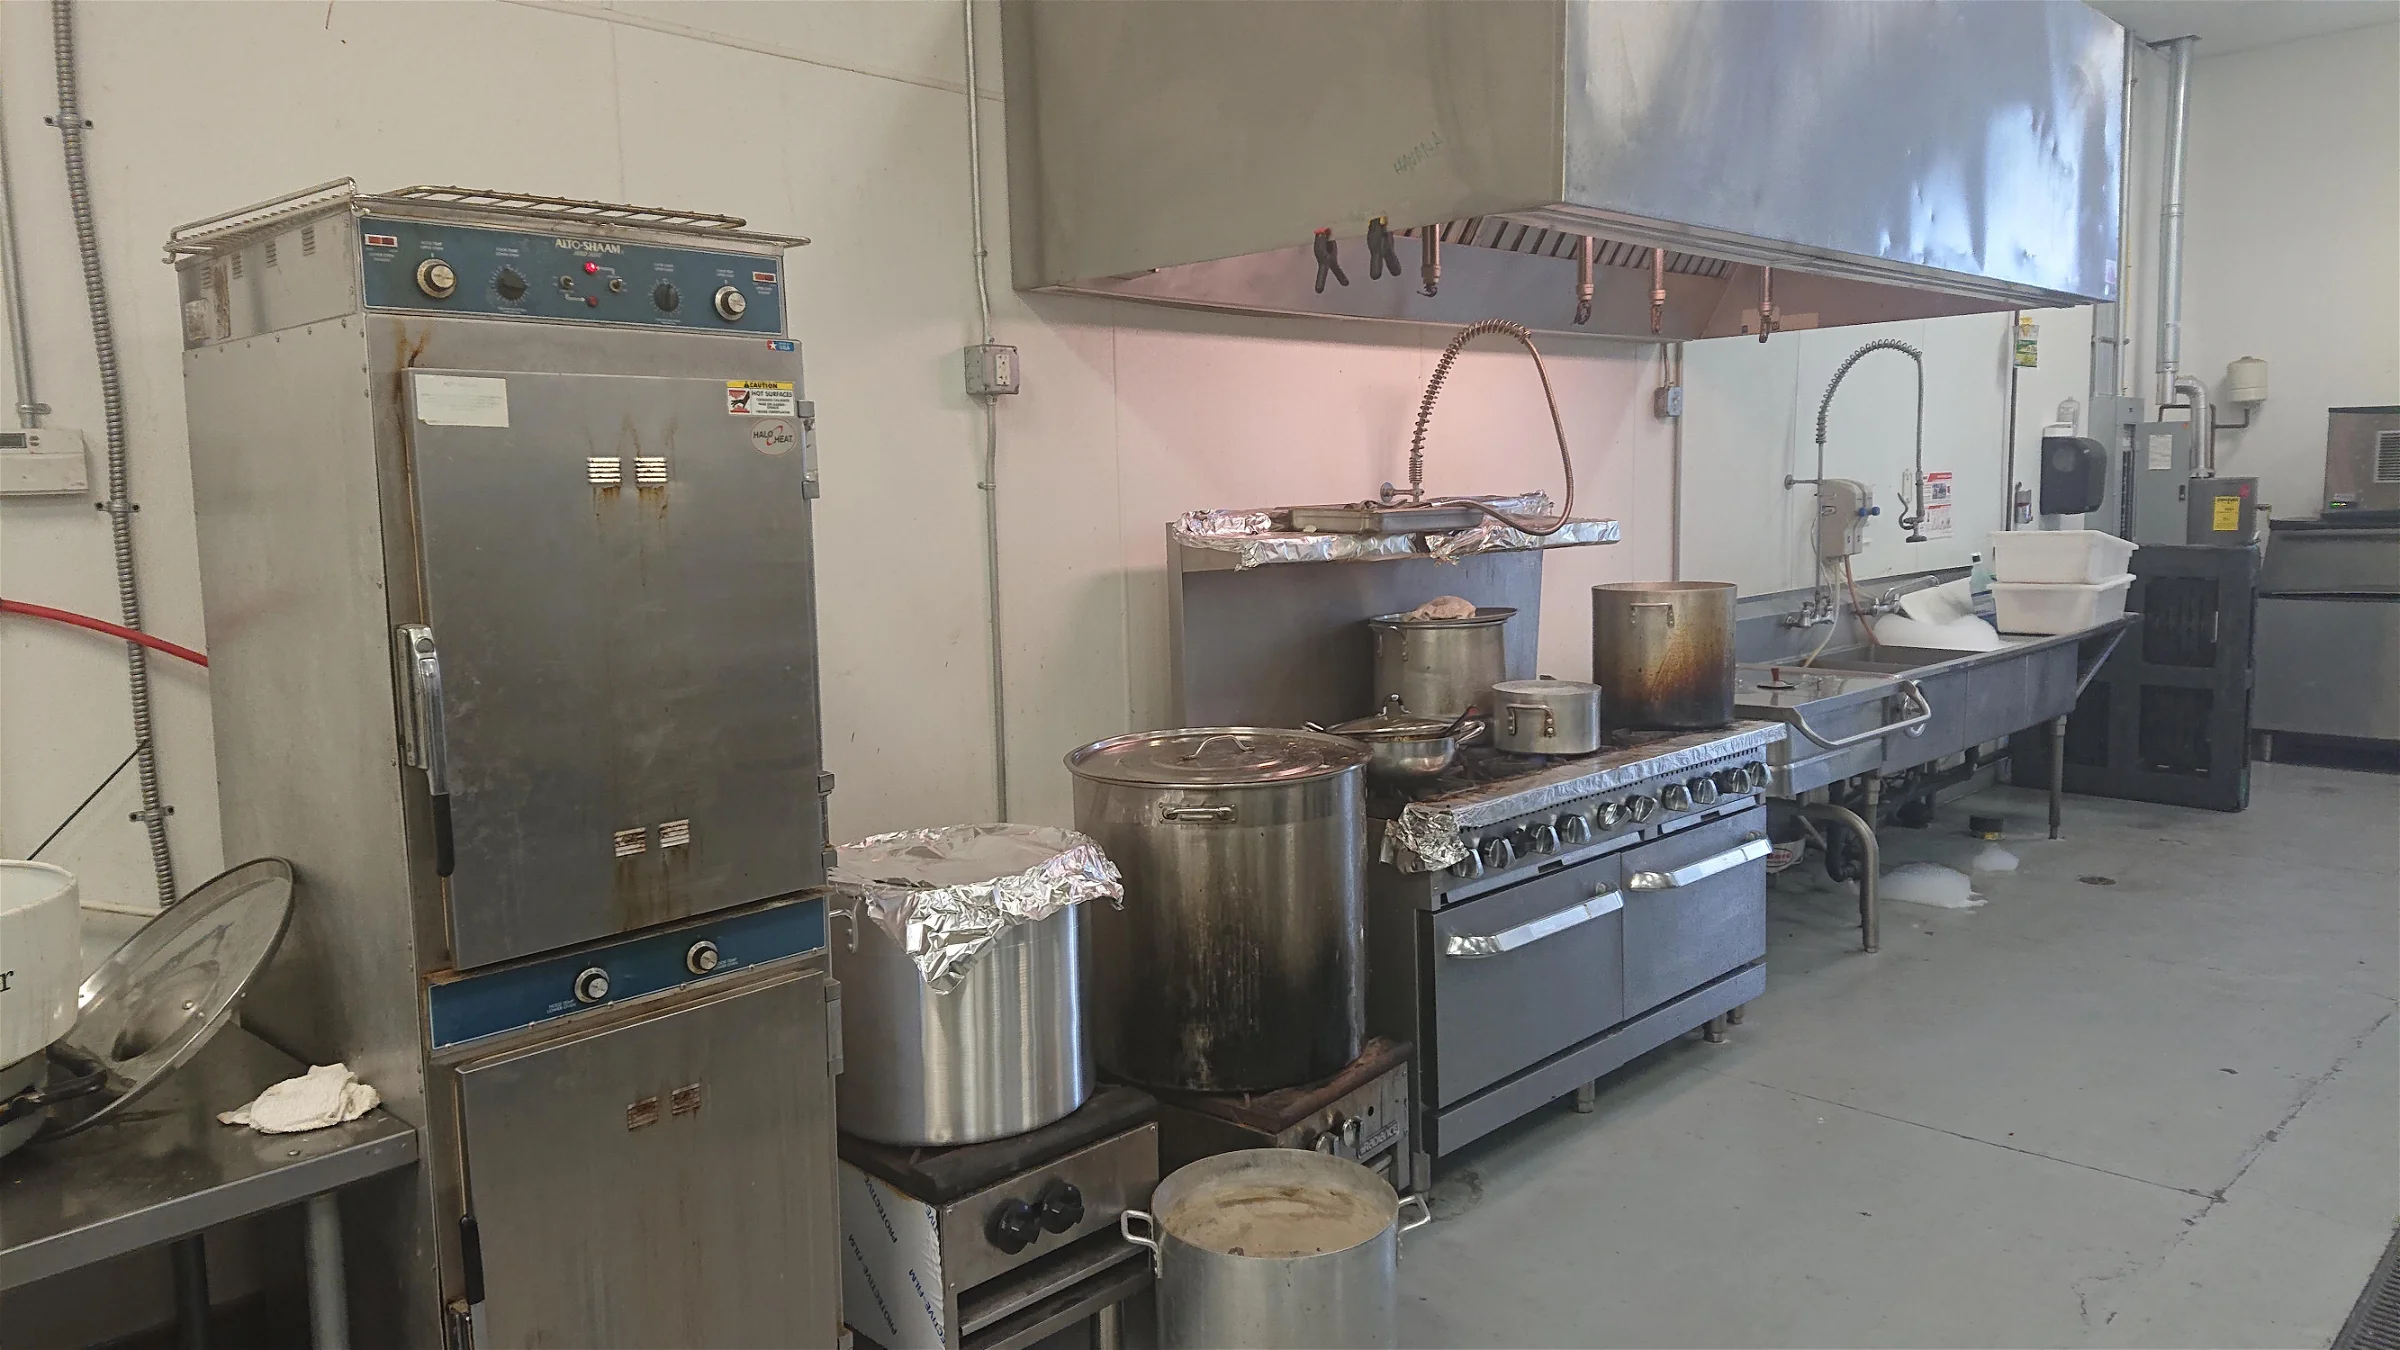 State-of-the-art commercial kitchen rental in Salt Lake City, Utah. Professional space, food prep, affordable rates.